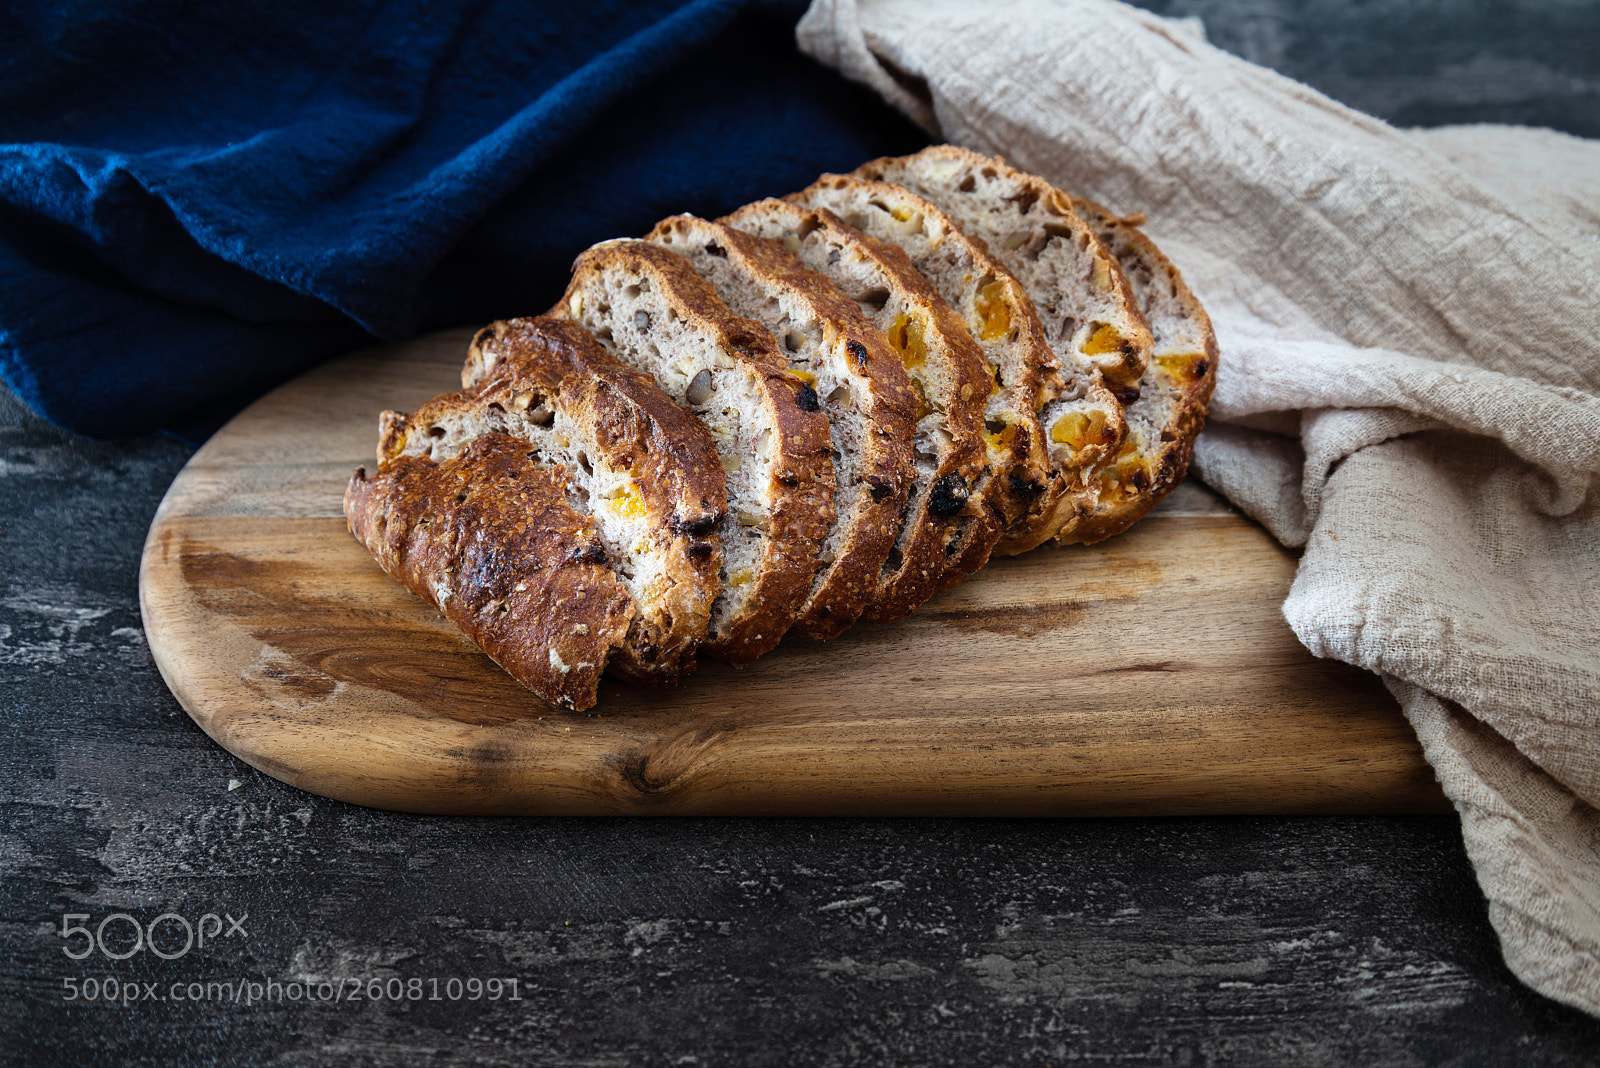 Nikon D800 sample photo. Baked french bread on photography